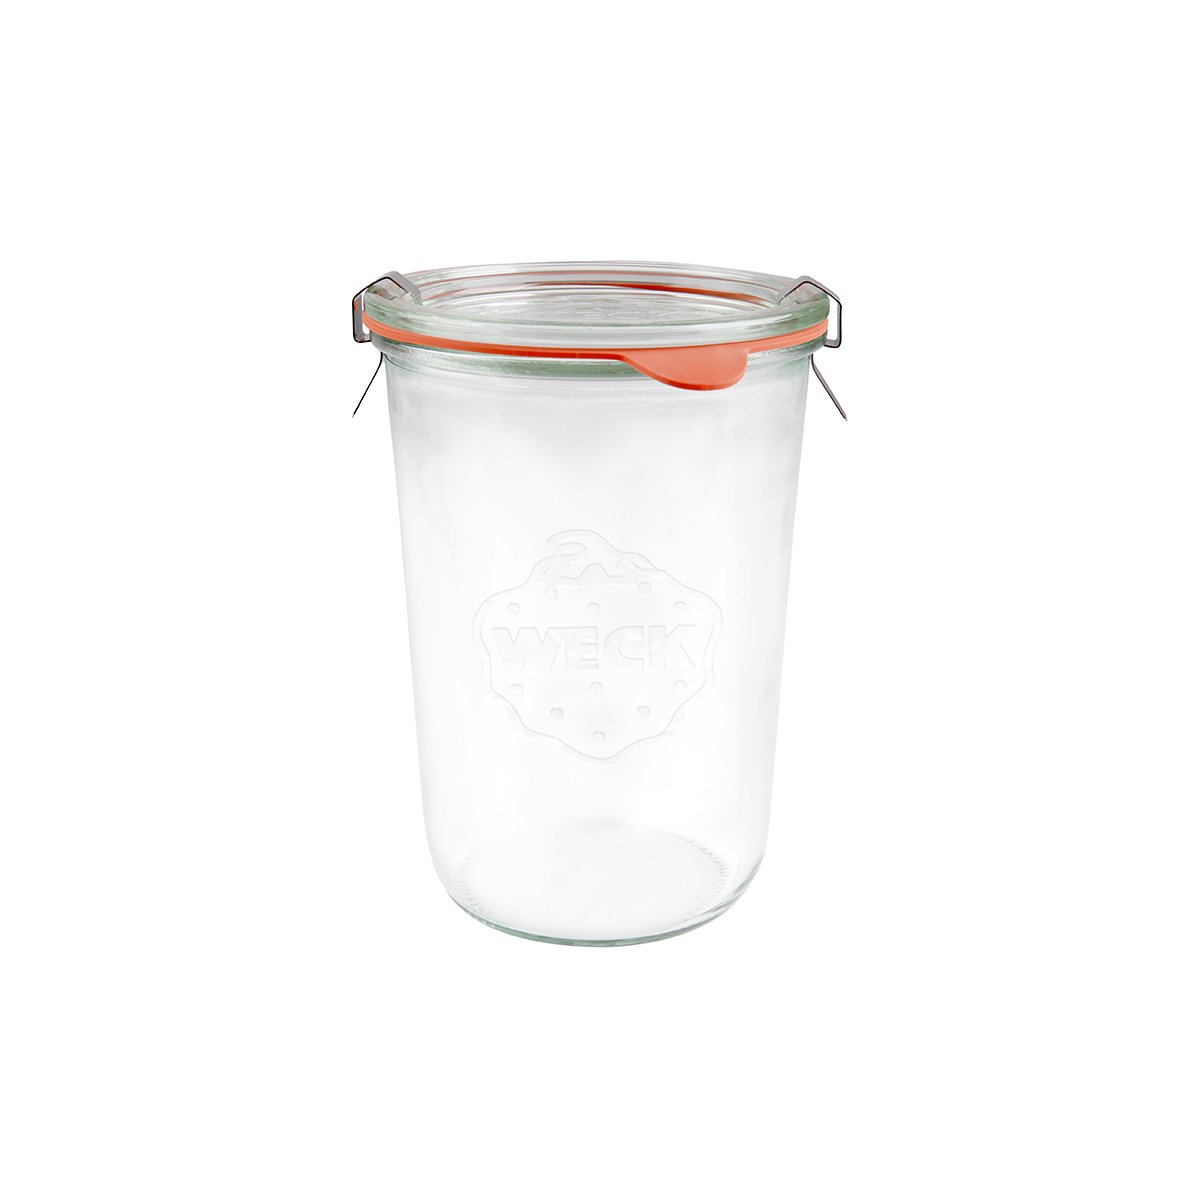 9982377 Weck Complete Glass Jar with Lid 100x147mm / 850ml Tomkin Australia Hospitality Supplies